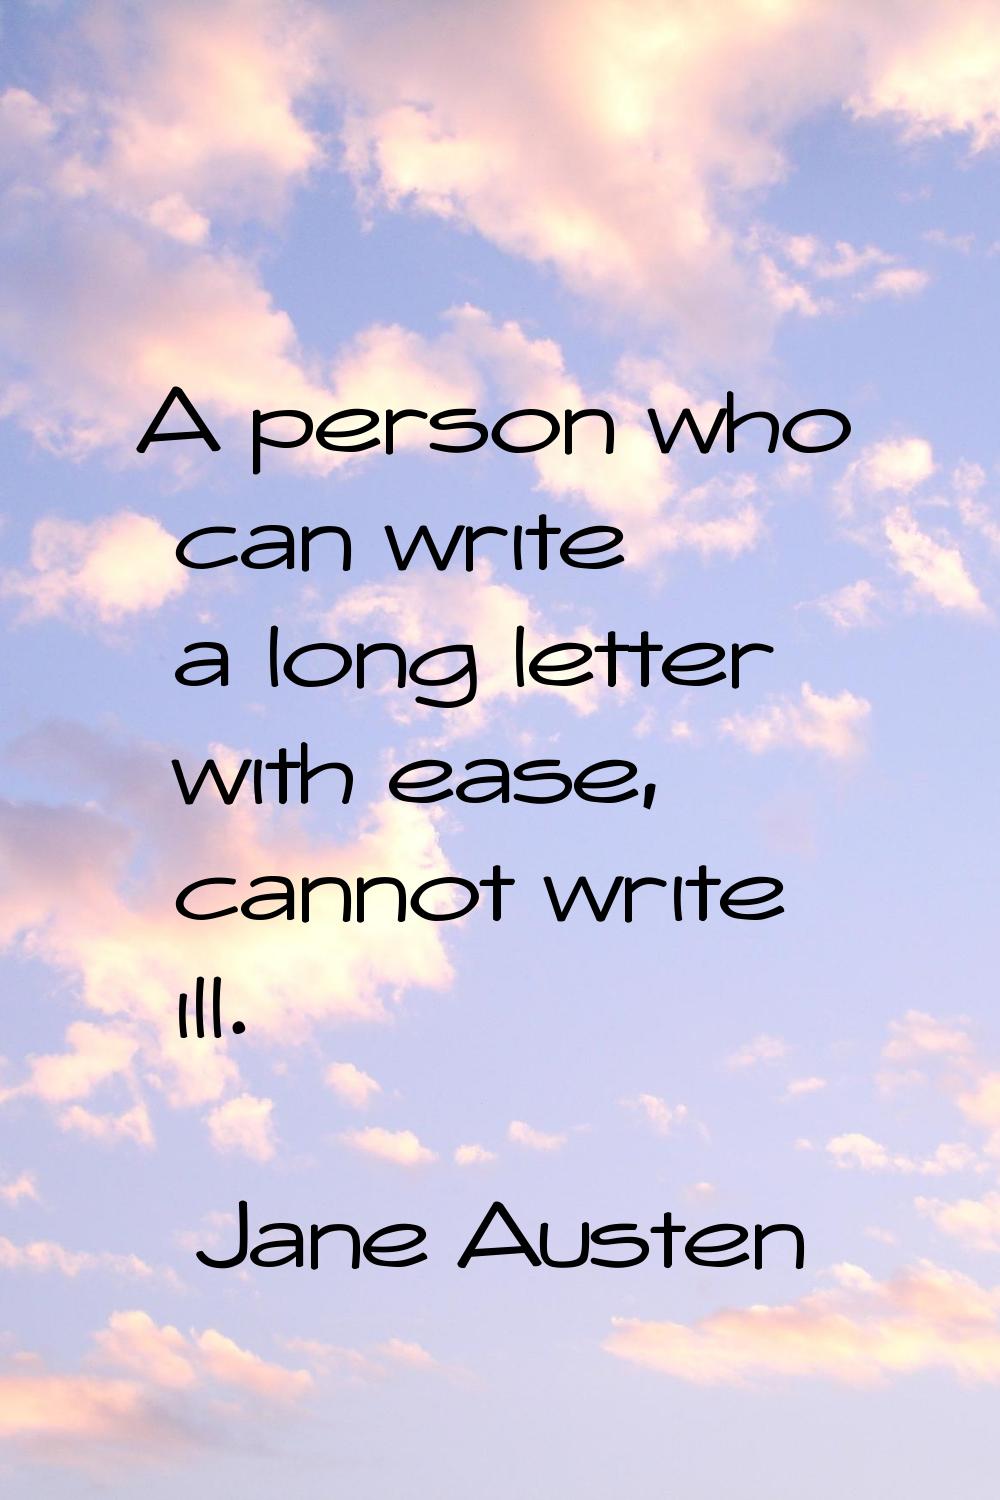 A person who can write a long letter with ease, cannot write ill.